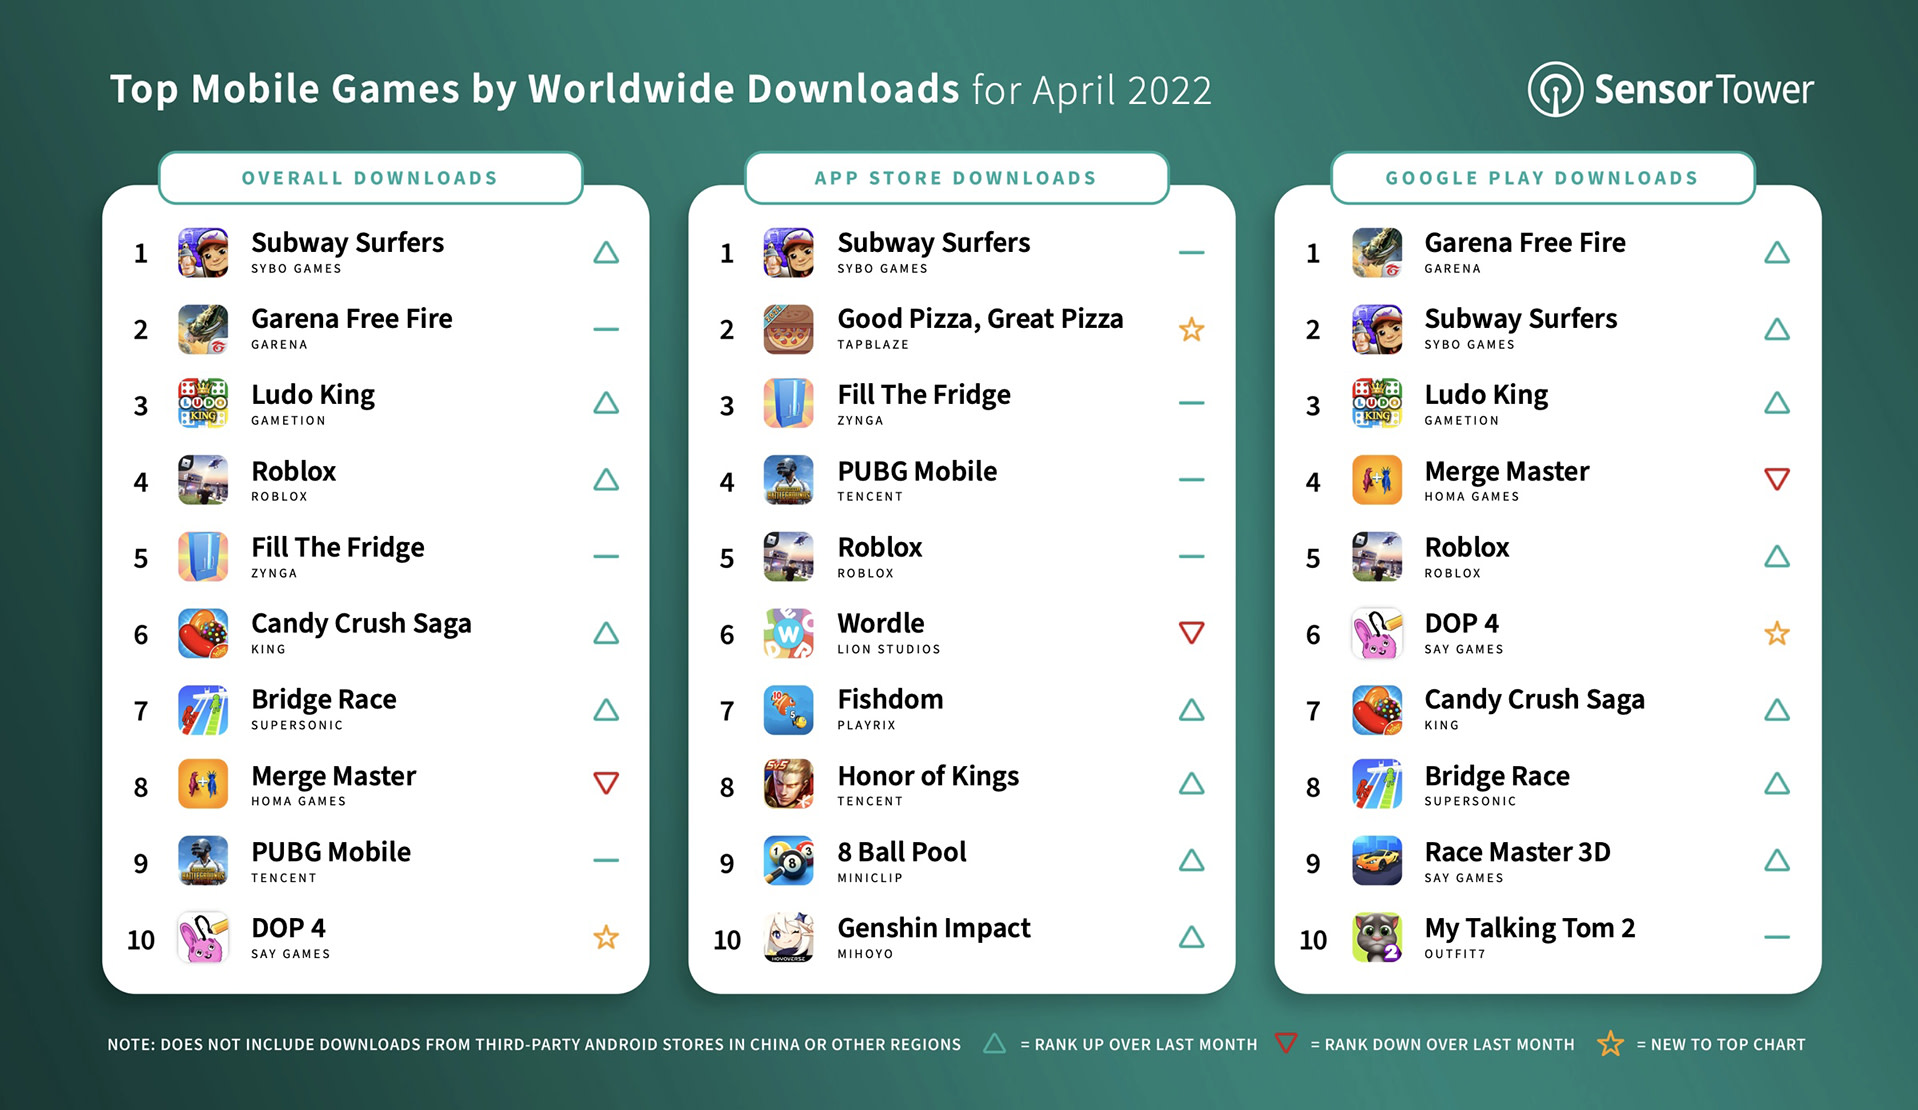 Top Mobile Games Worldwide for April 2022